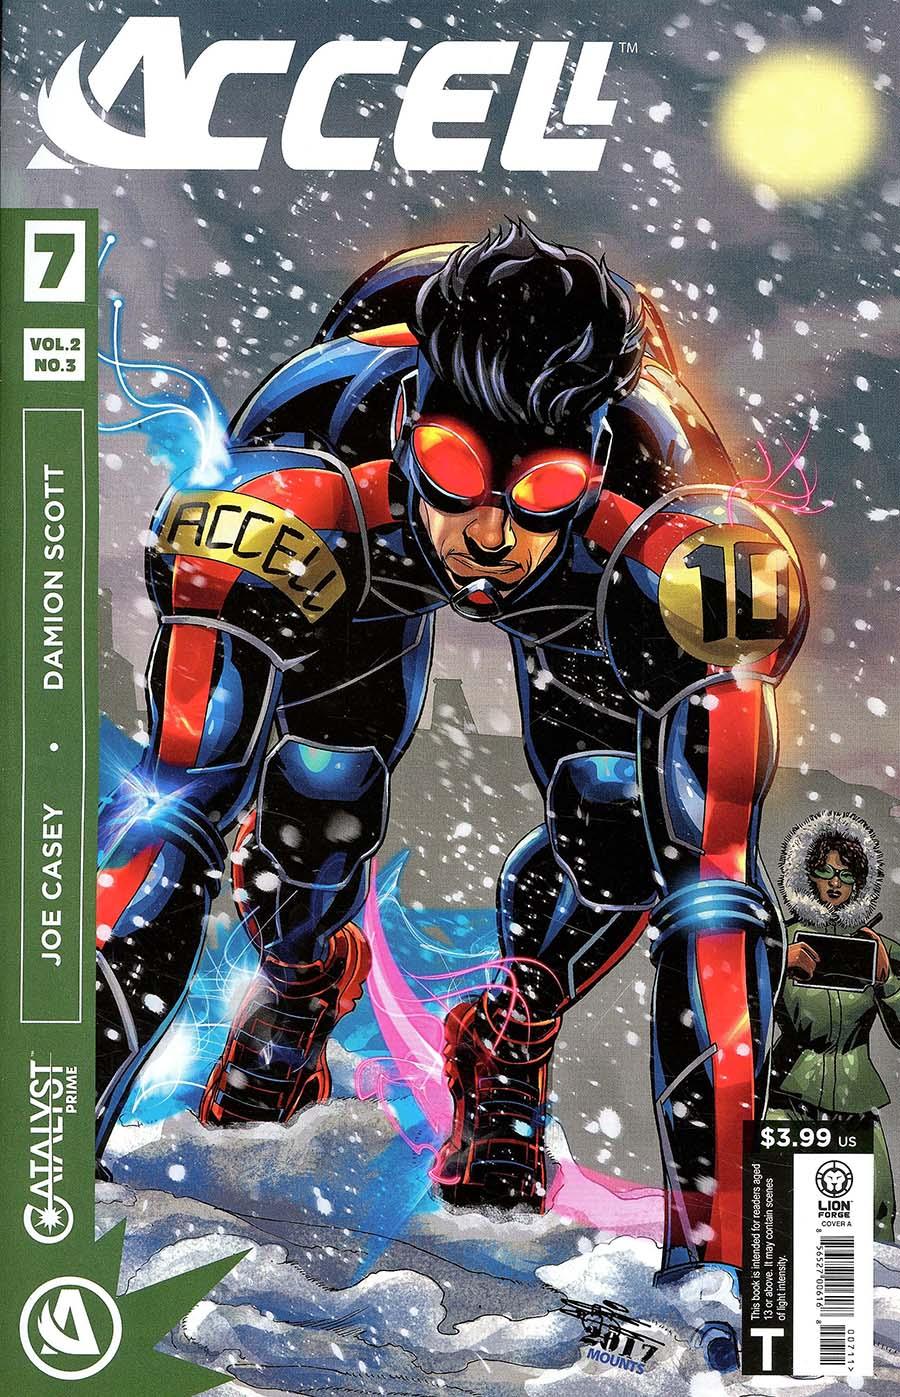 Catalyst Prime Accell Vol. 1 #7